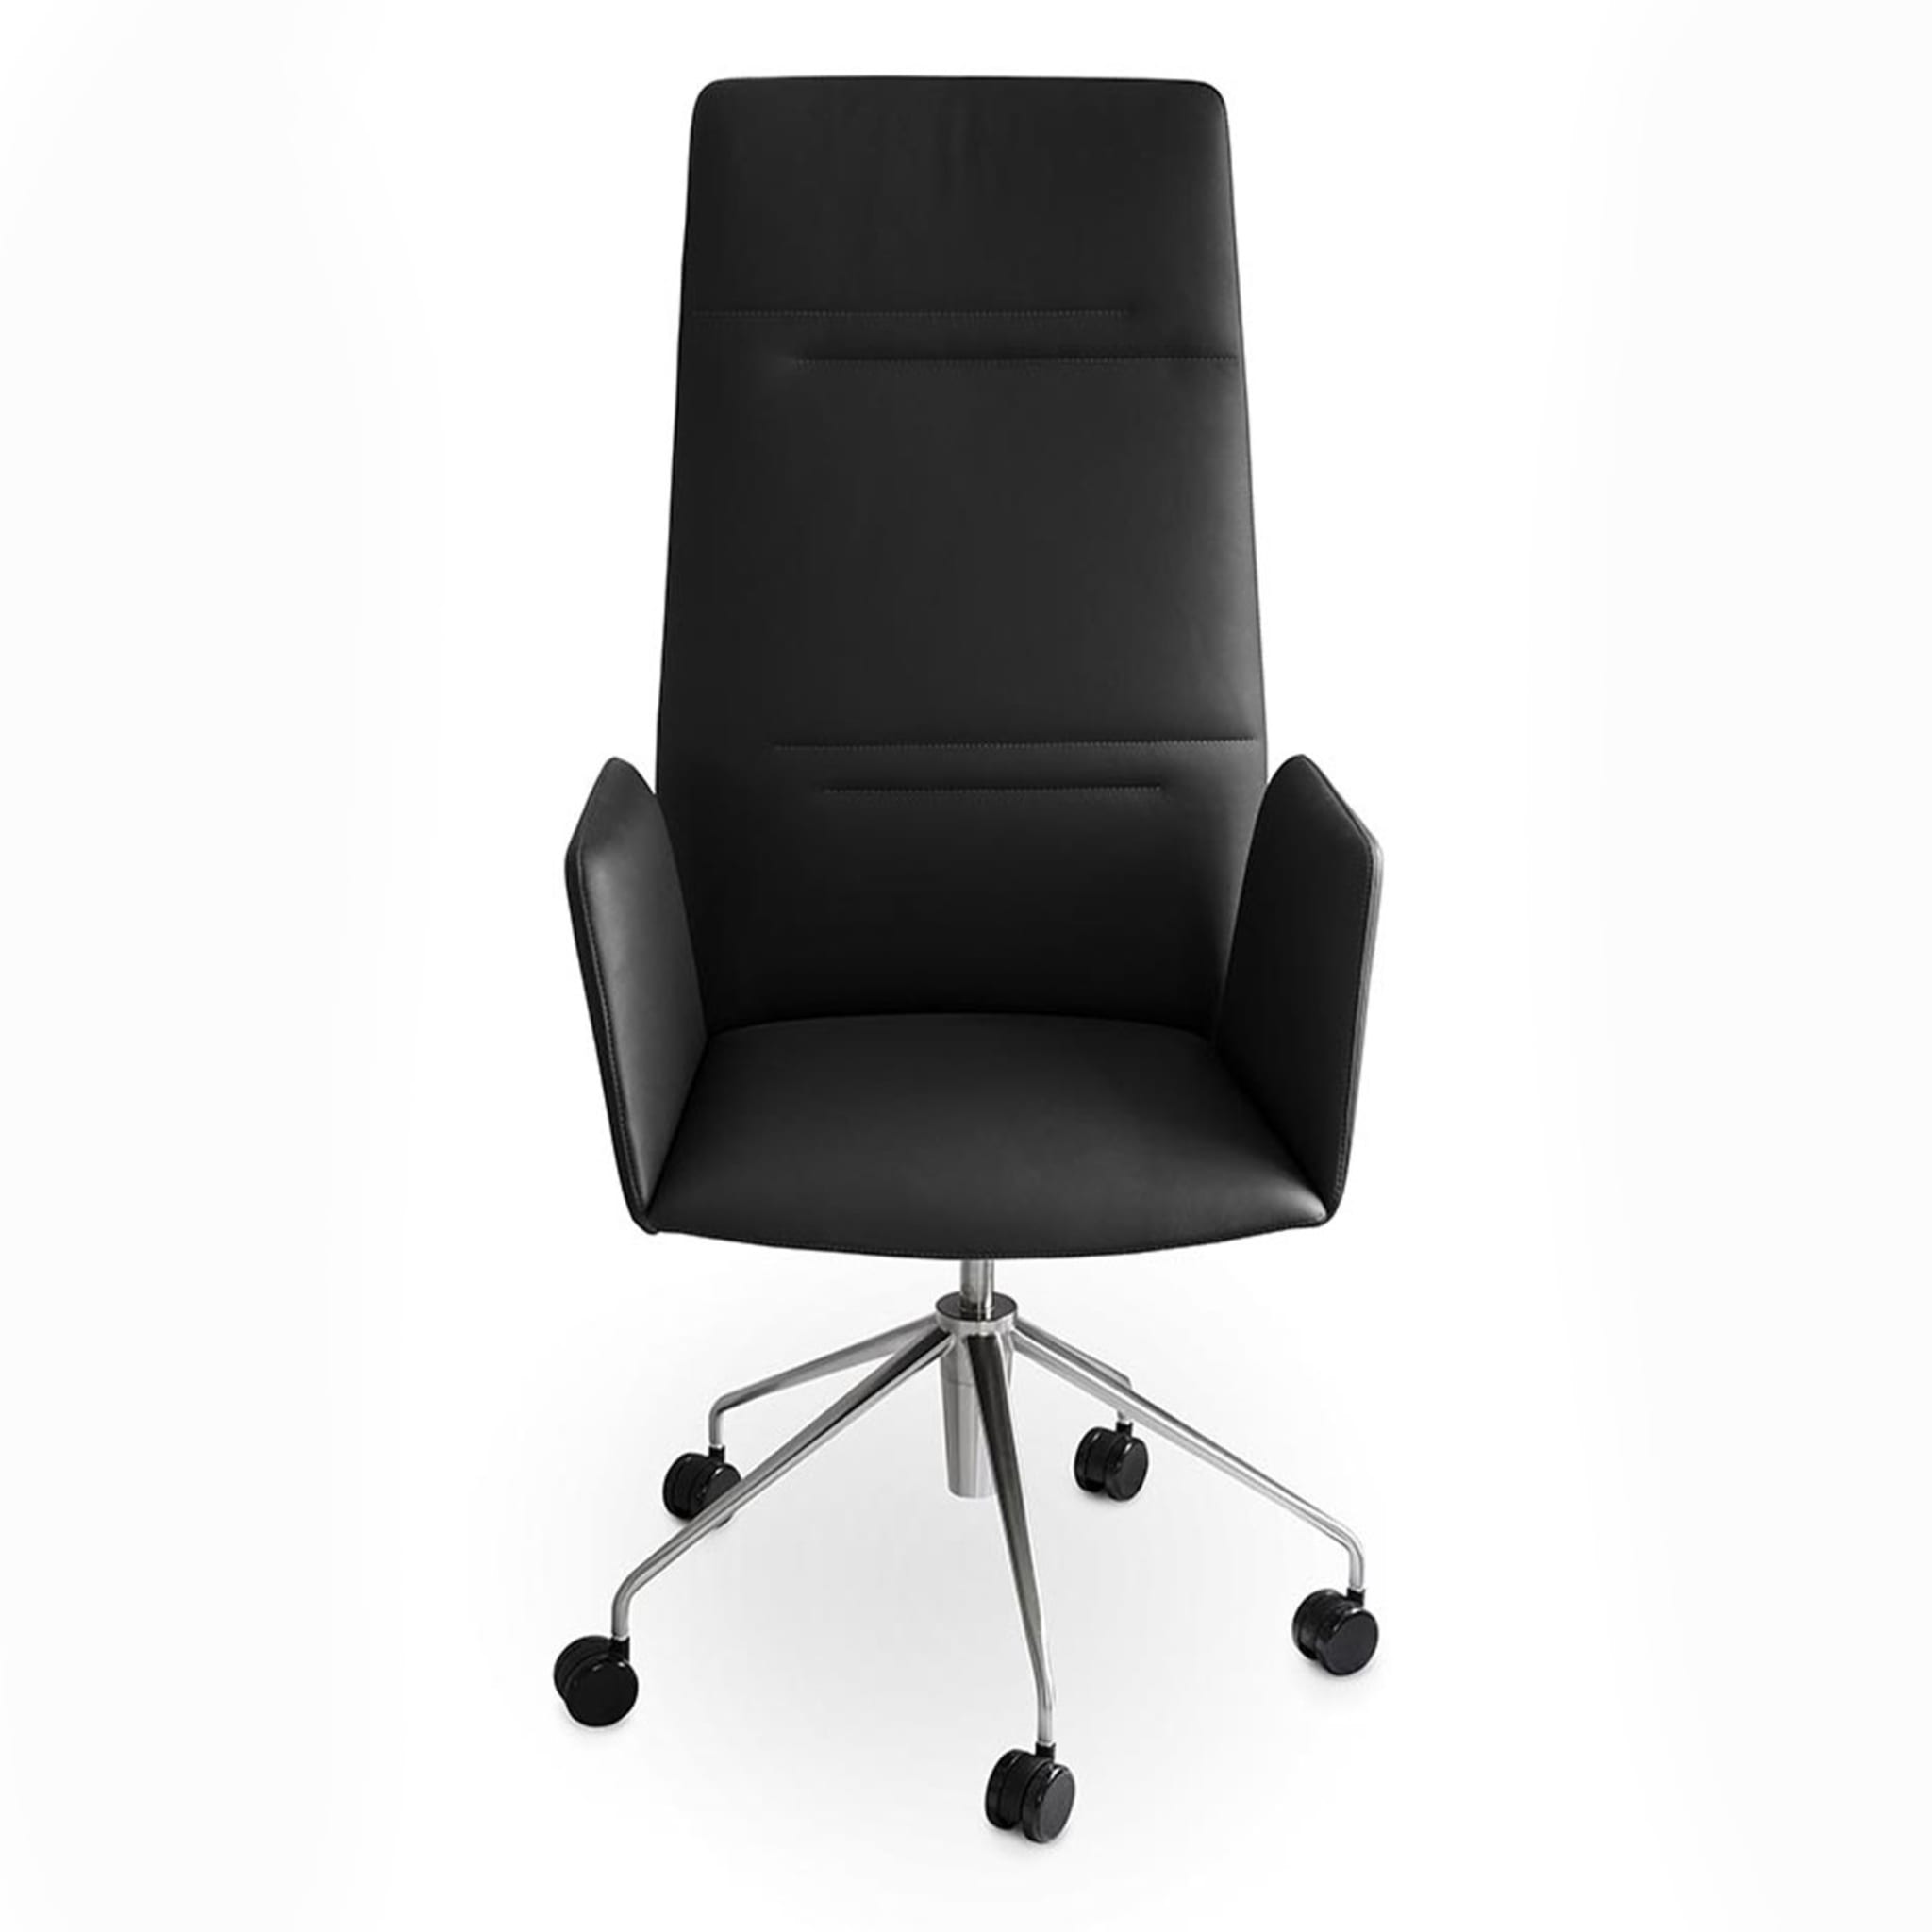 Vela Tall Black Leather Swivel Armchair by Lievore Altherr Molina - Alternative view 1